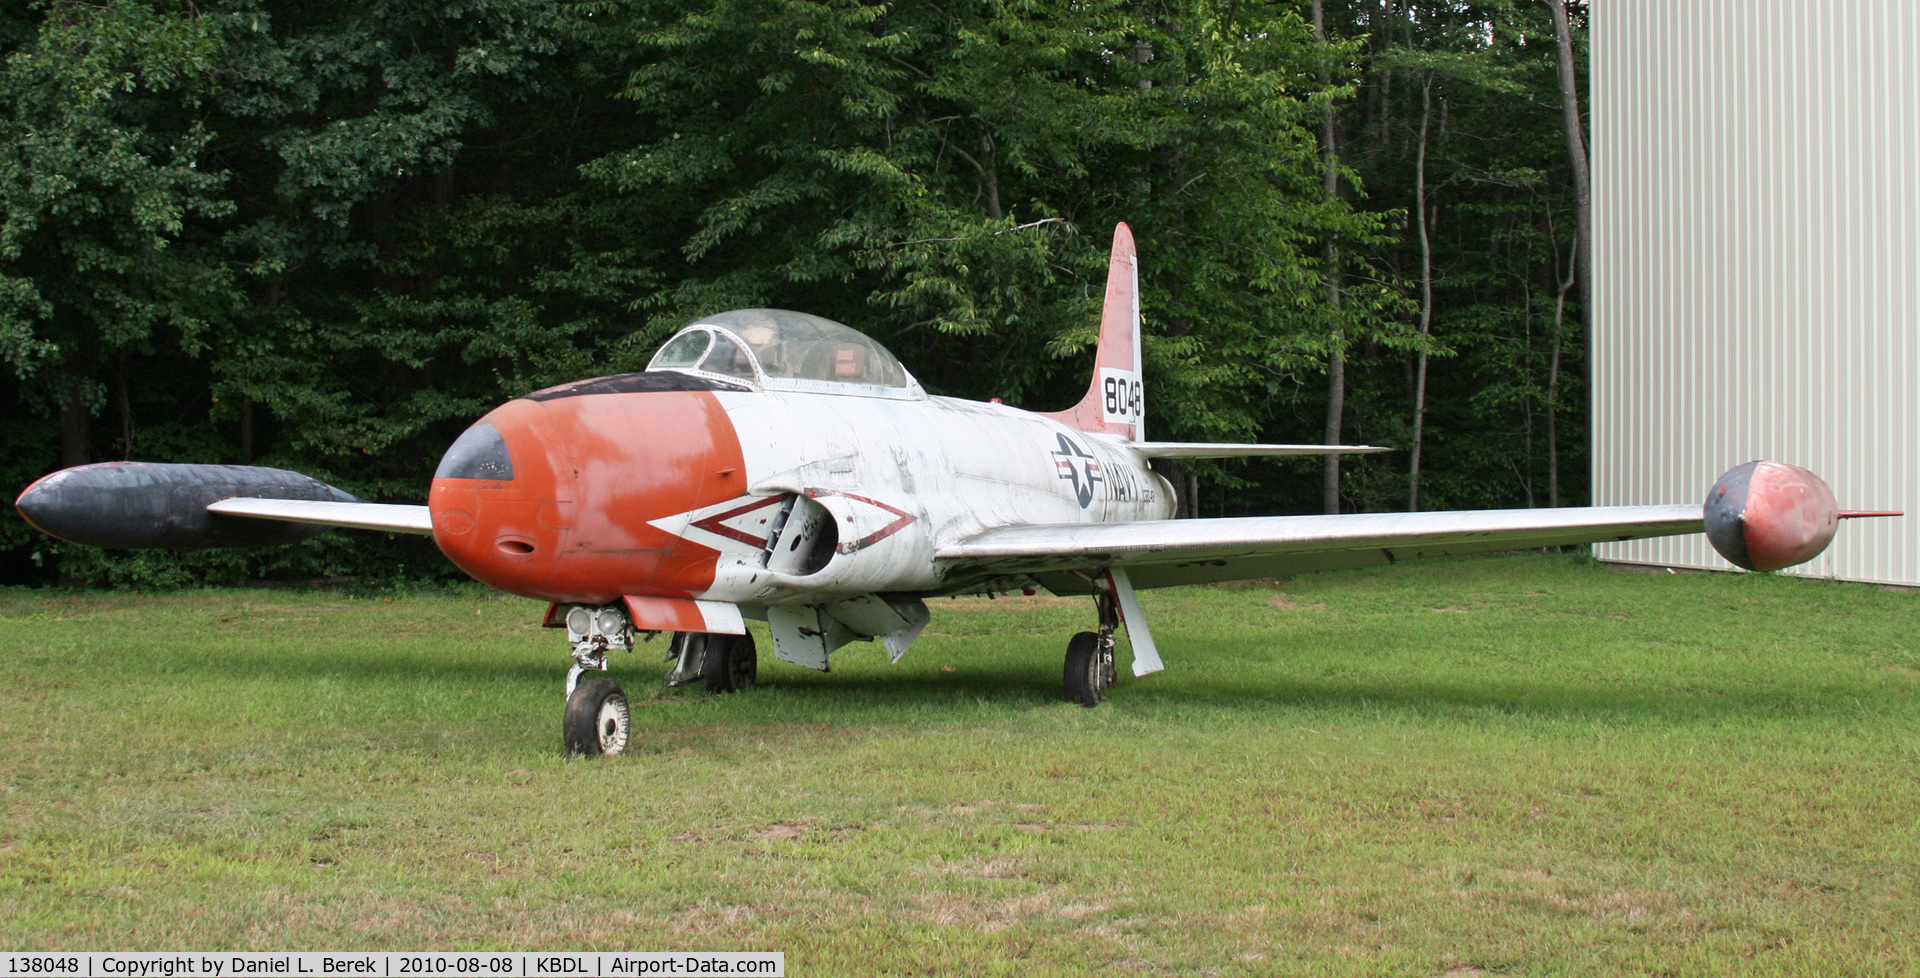 138048, 1953 Lockheed T-33B Shooting Star C/N 580-8985, This Lockheed TV-2 (T-33) trainer is on display at the New England Air Museum.